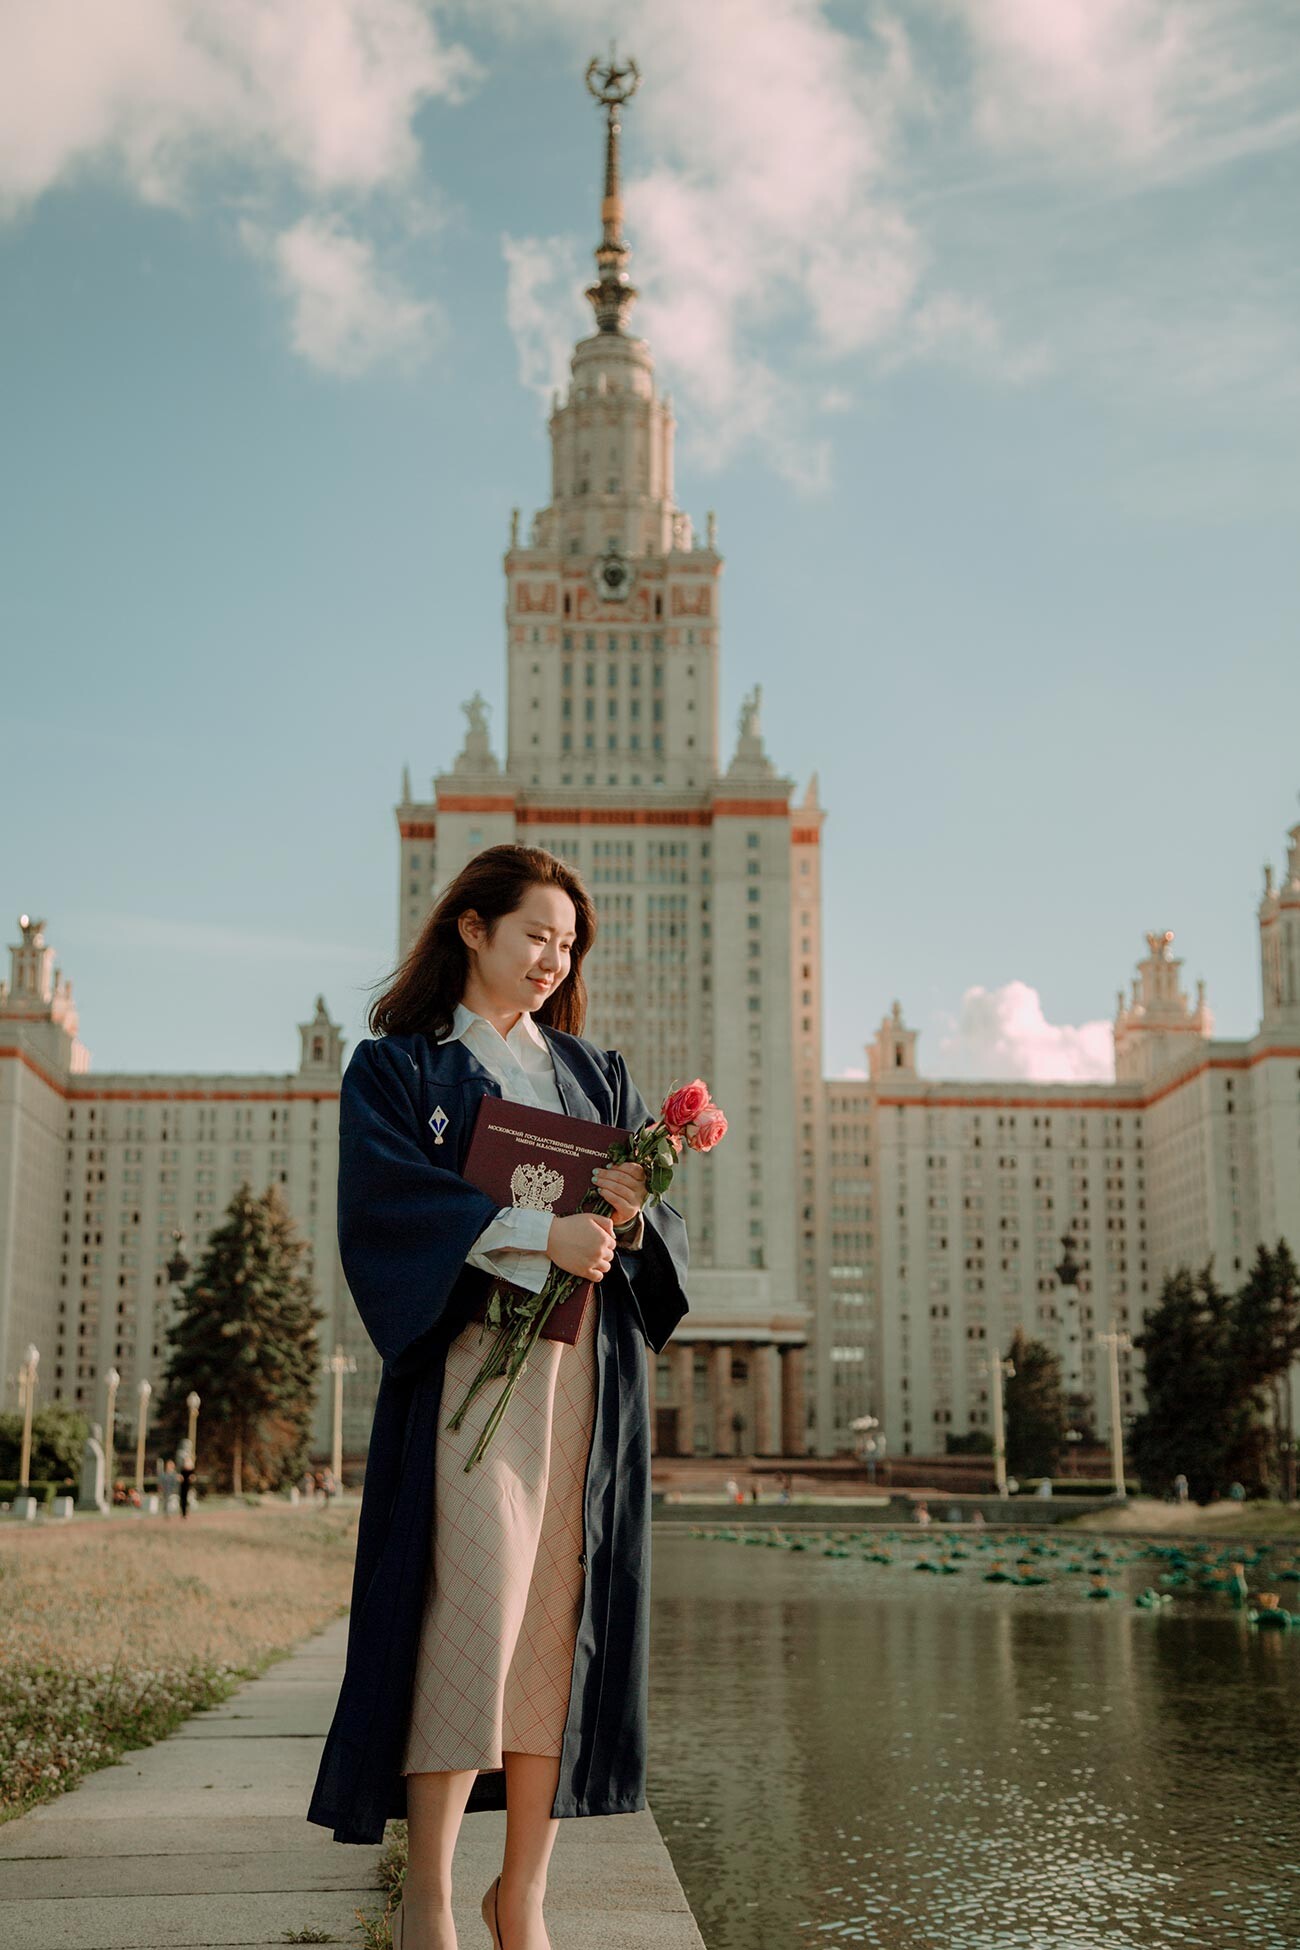 Chang Le in front of the Moscow State University